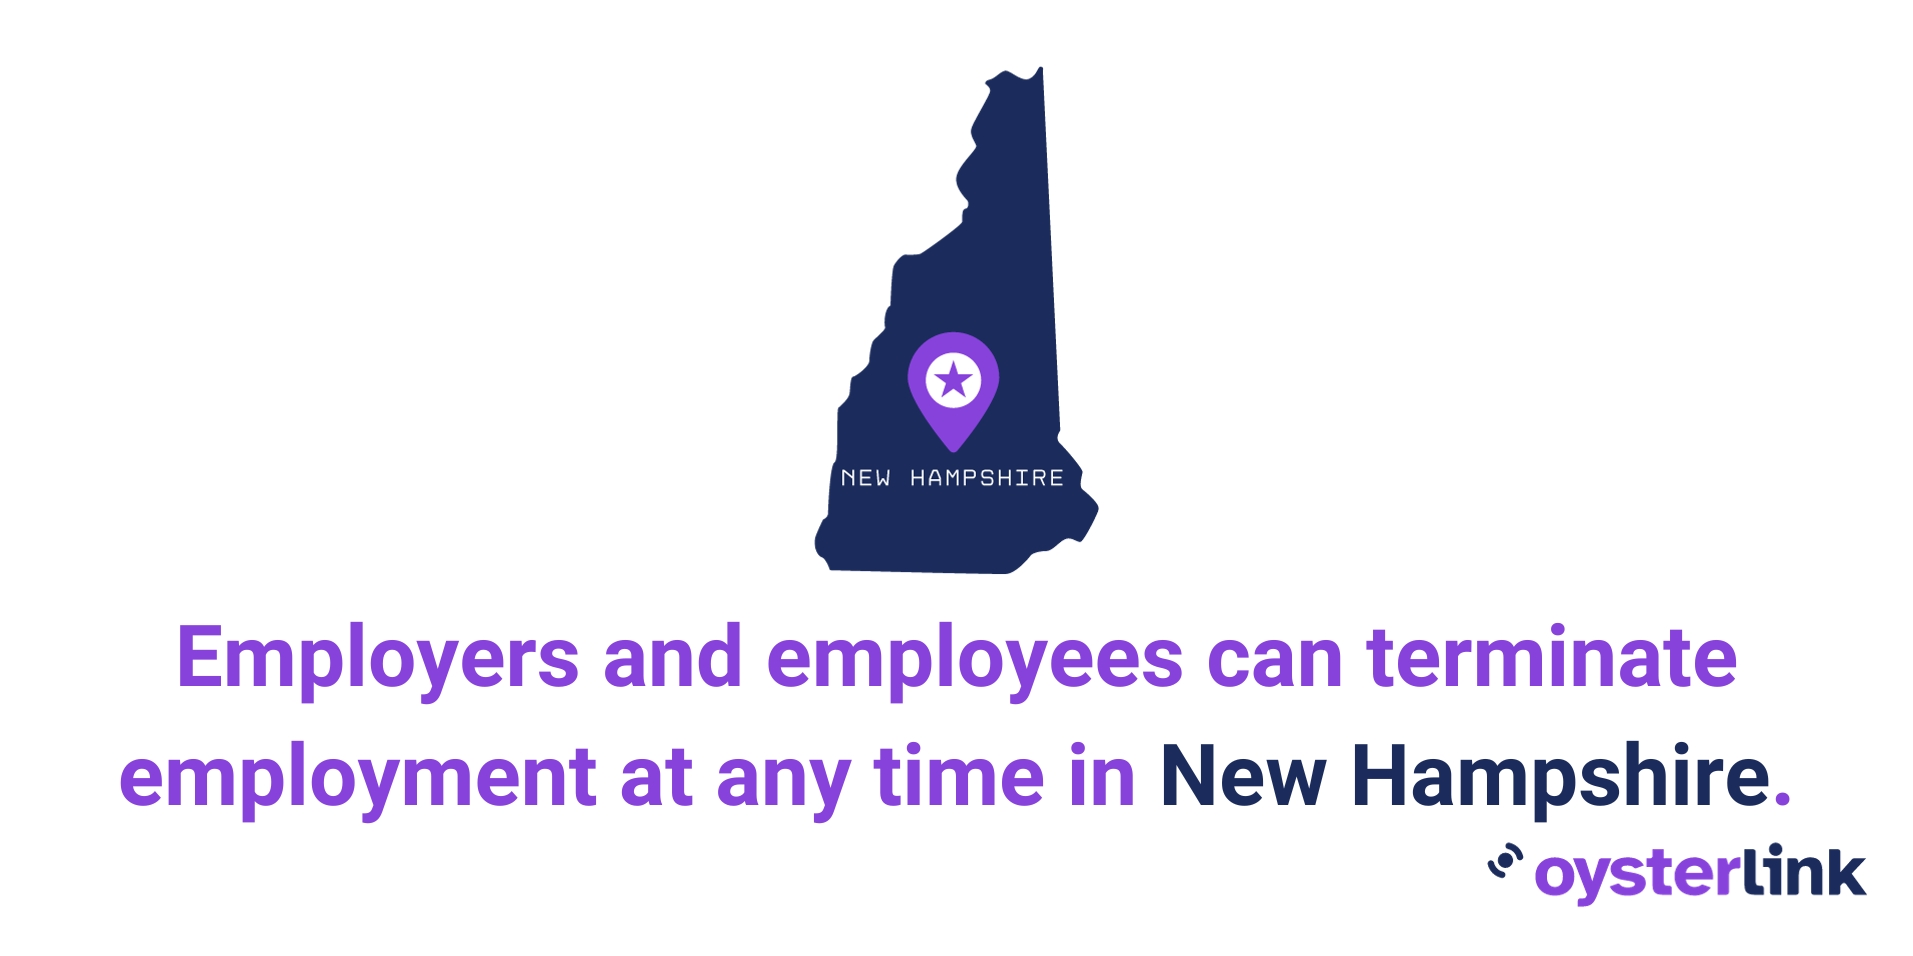 New Hampshire follows an employment-at-will doctrine